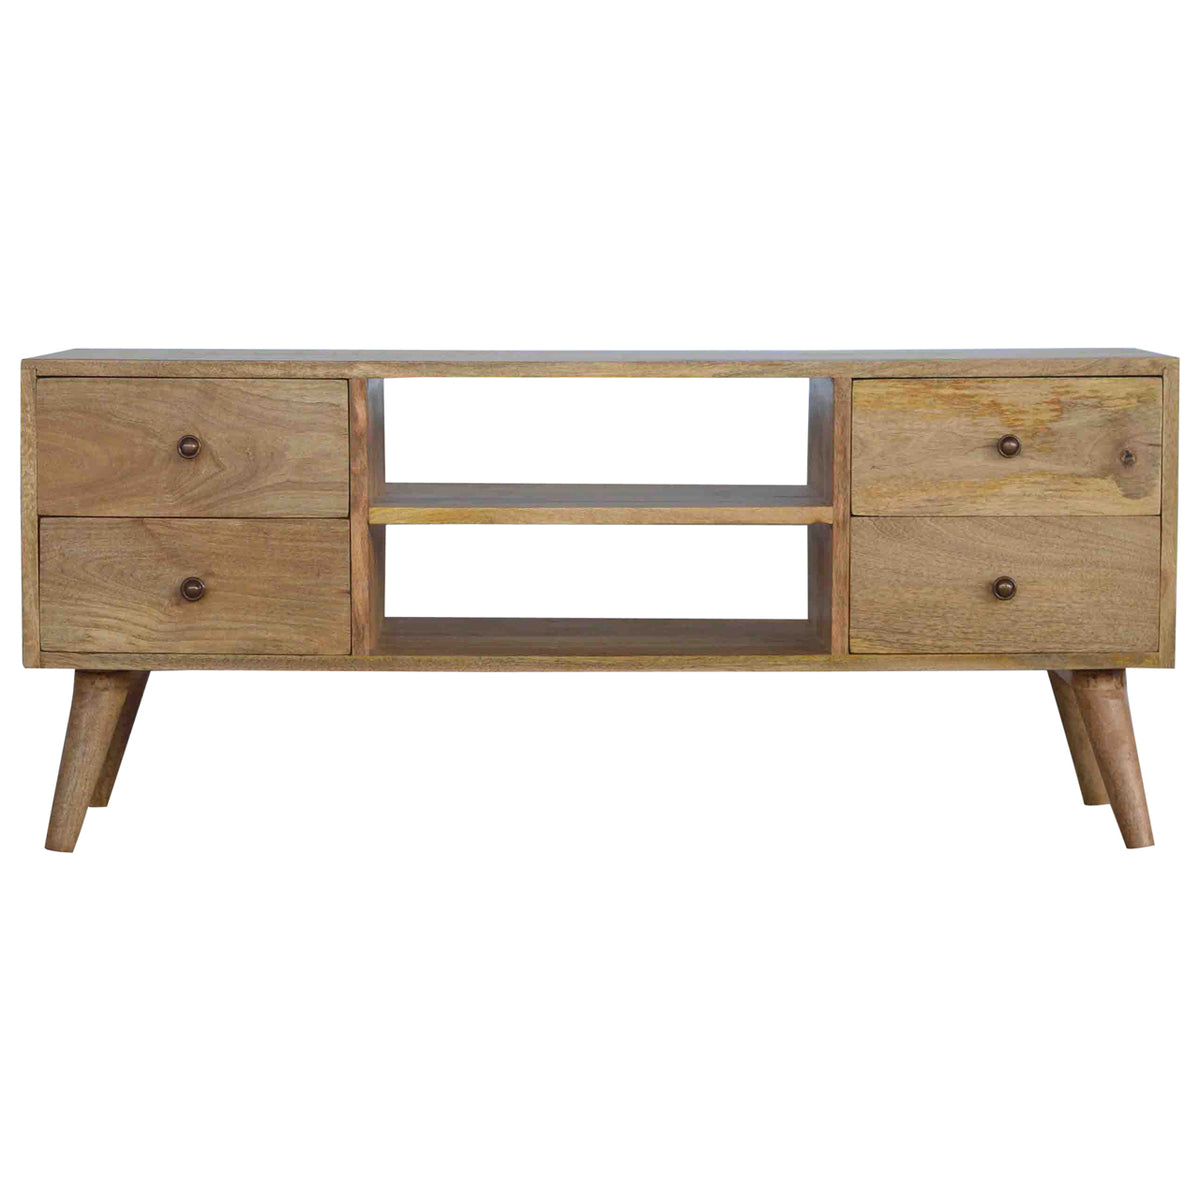 Wide TV stand light wood with drawers long media unit with storage TV stand for 40 inch TV 110cm wide media unit uk